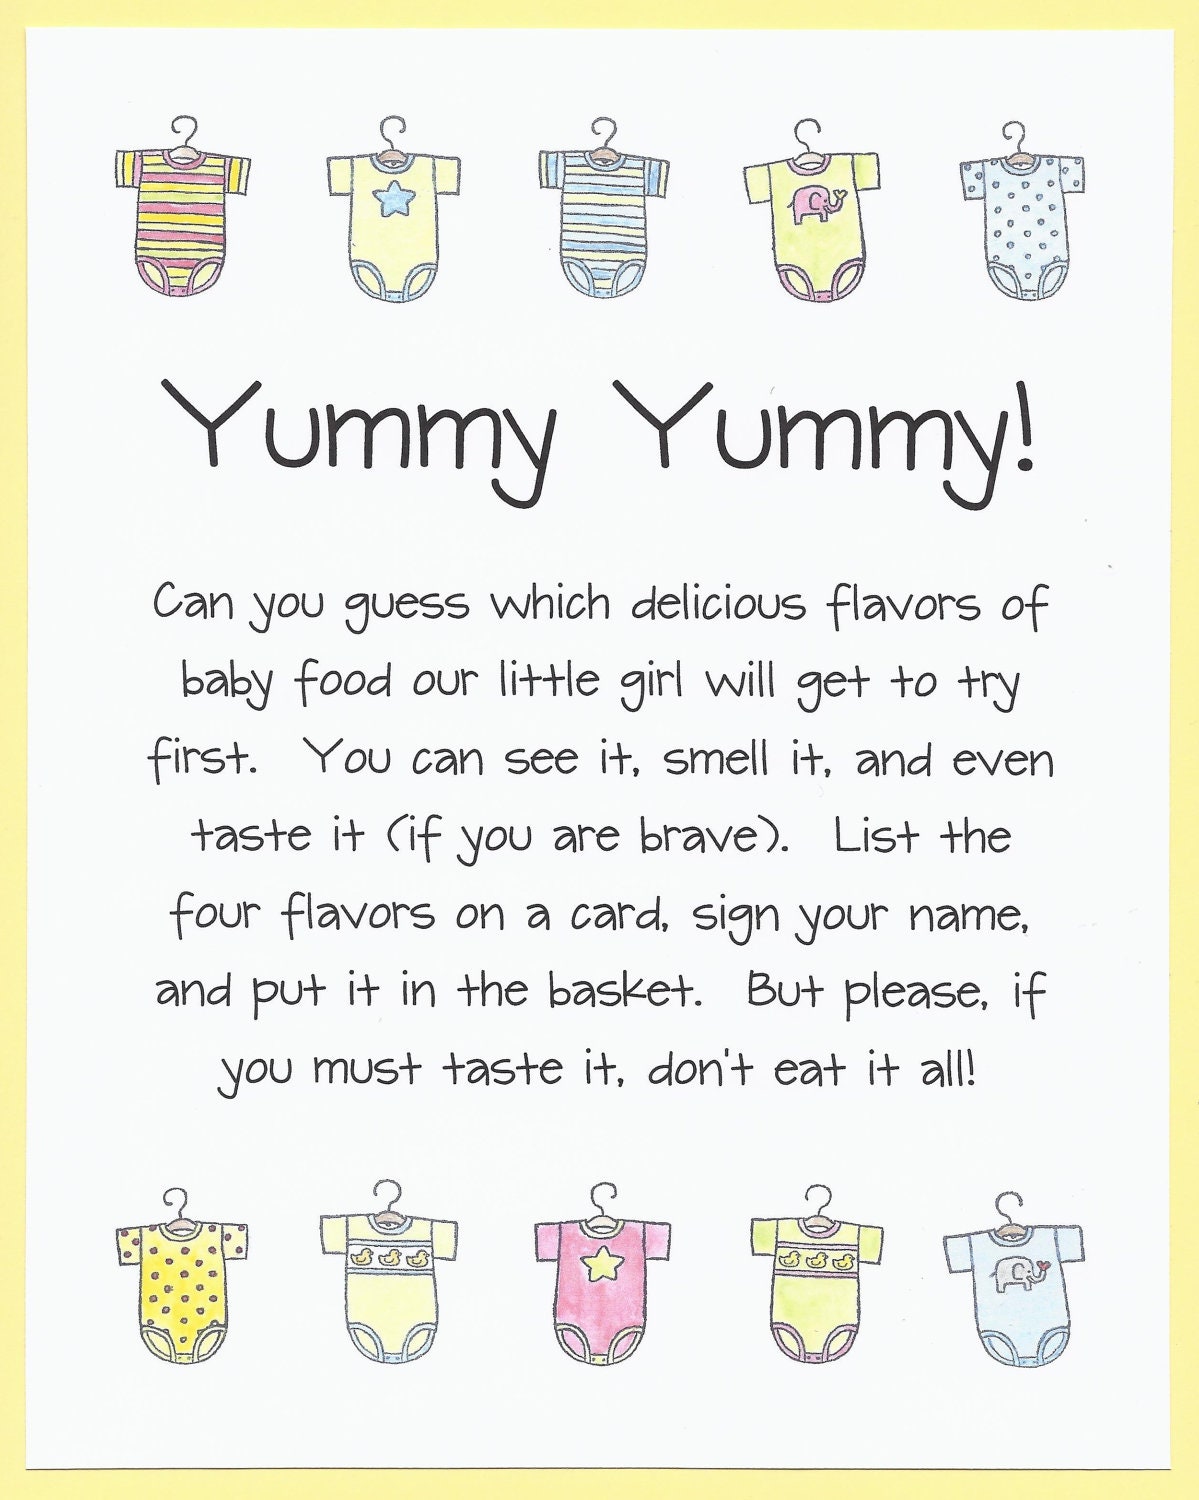 661 New baby shower game food tasting 63 Baby Shower Game Yummy Yummy Baby Food Game by CardsByKooper 